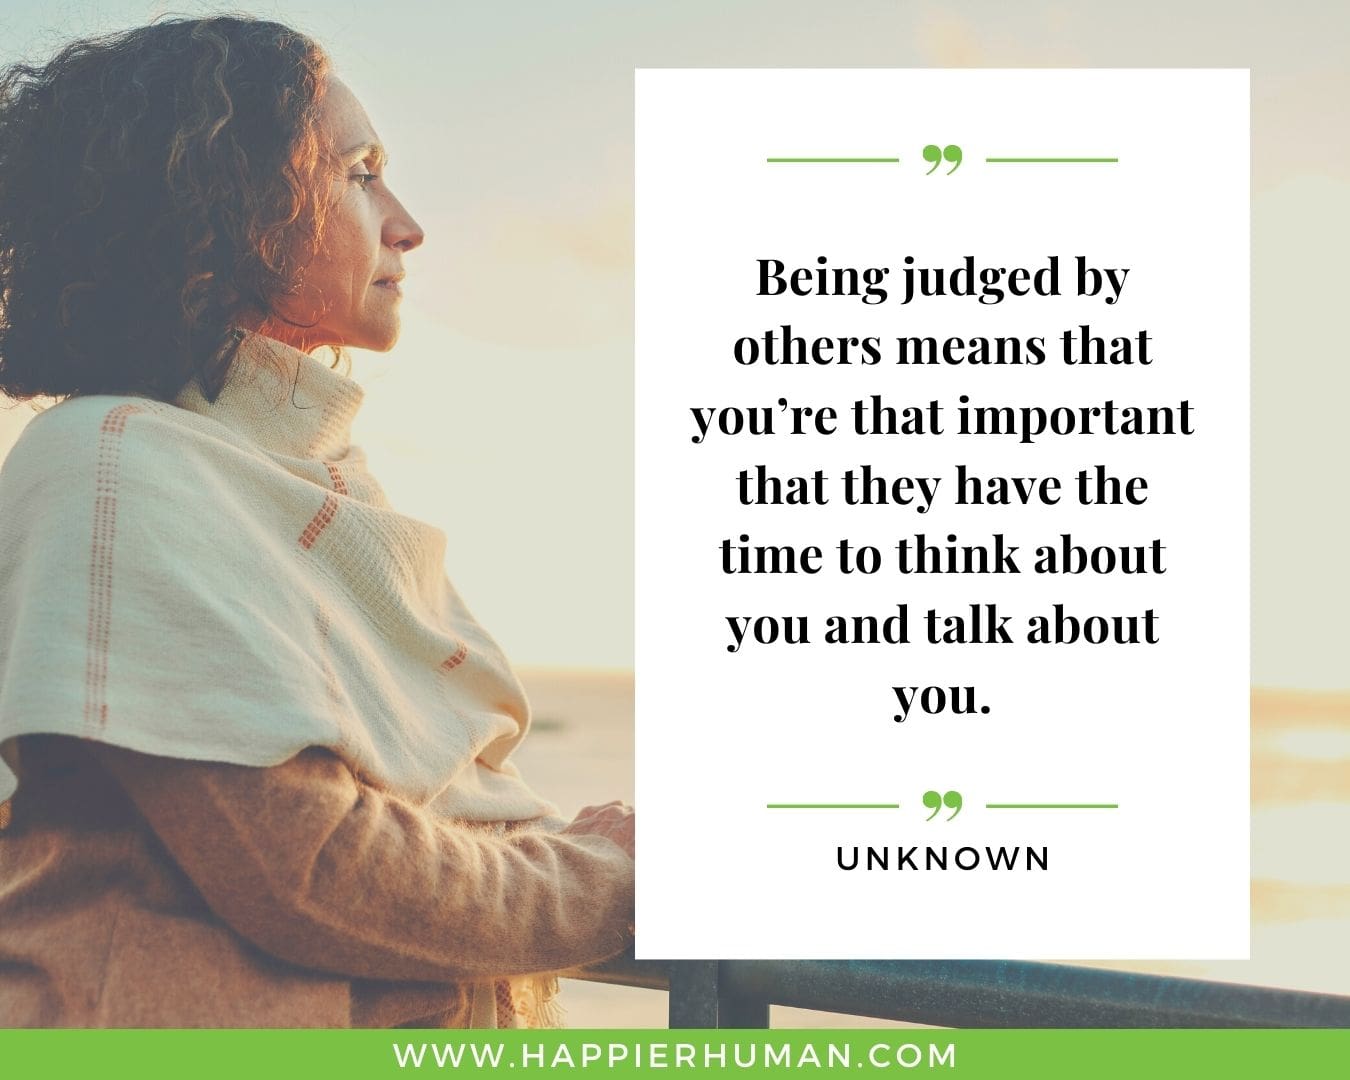 Haters Quotes - “Being judged by others means that you’re that important that they have the time to think about you and talk about you.” - Unknown